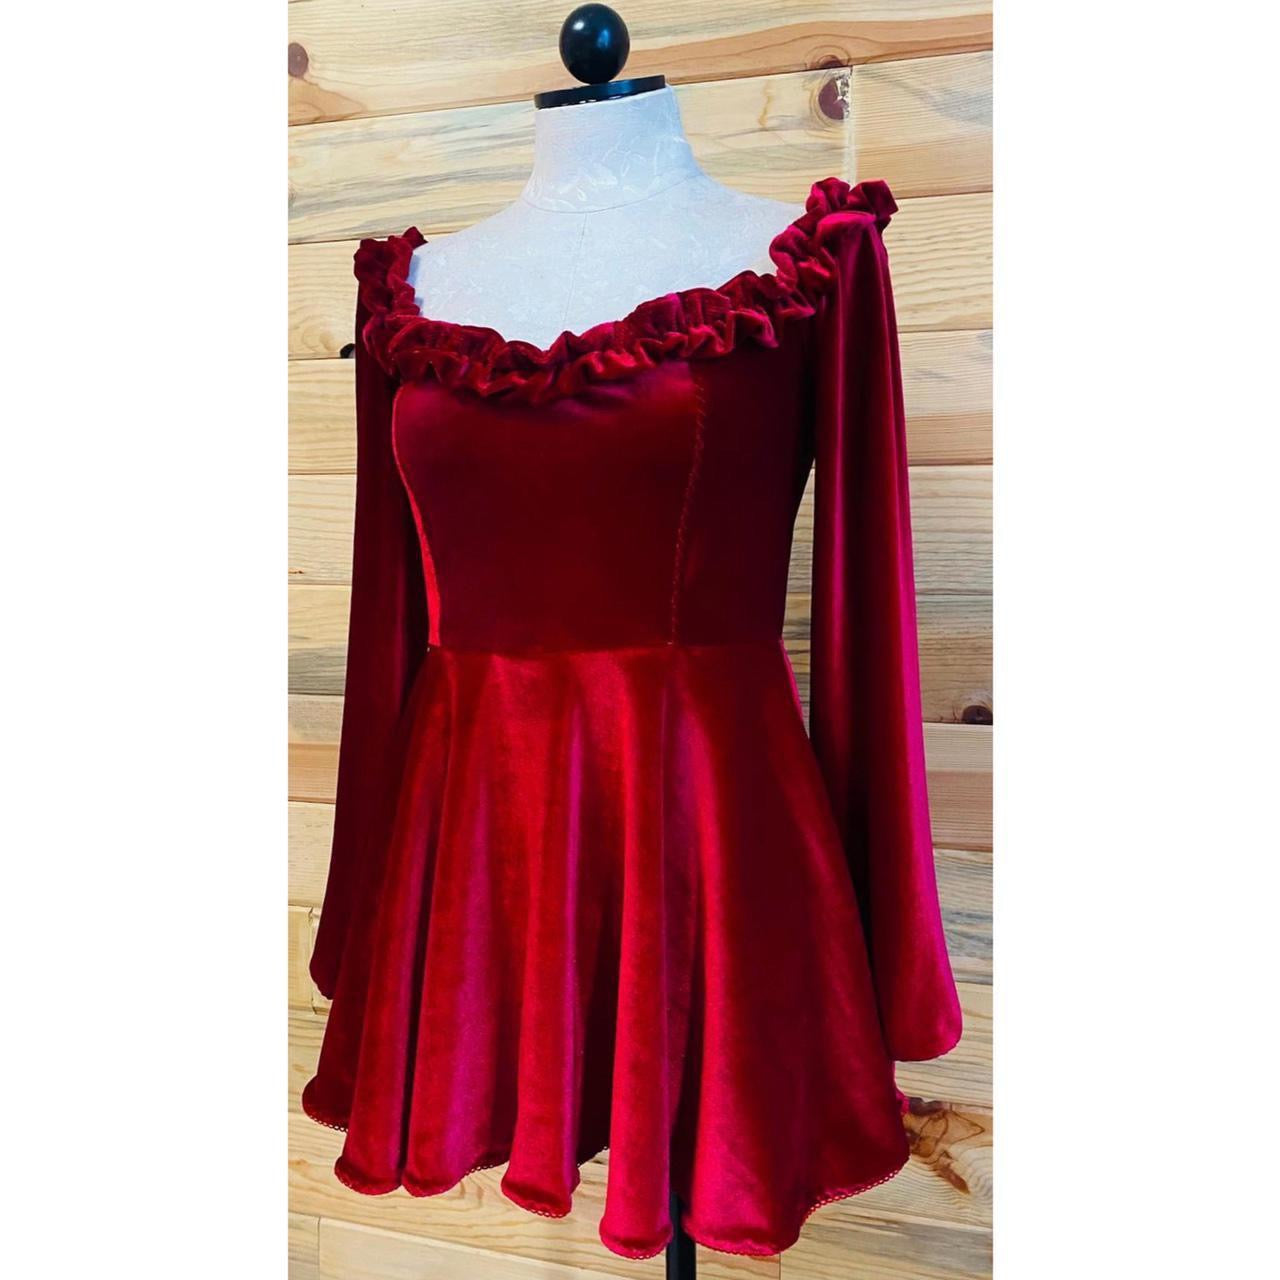 The Maggie Dress in Red